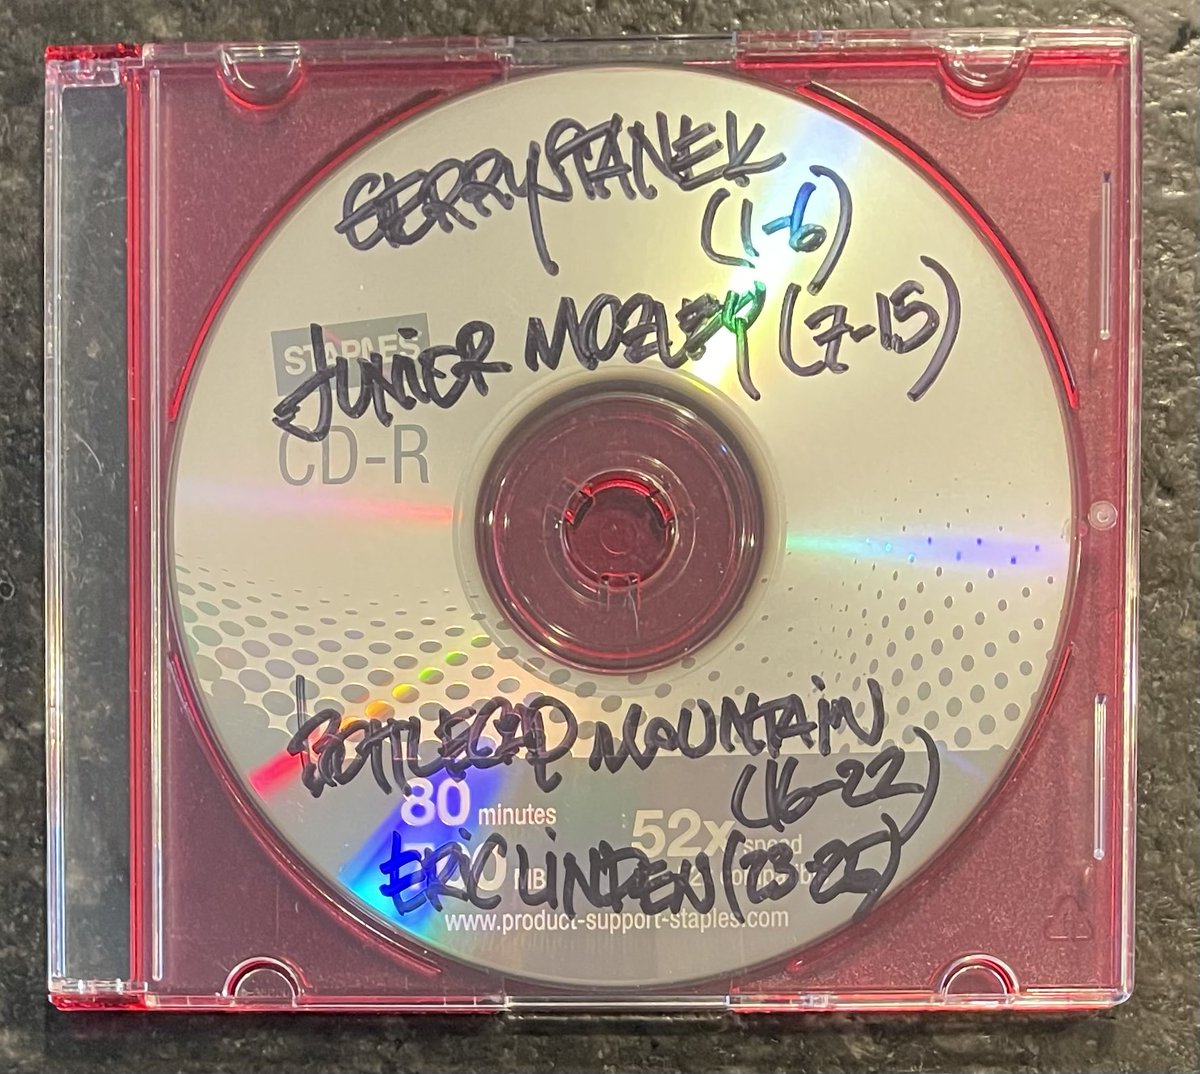 @DJCalc @gerrystanekGSO @Bandcamp All 6 songs are so damn fantastic!!! Married them up on a new CDR with some other awesome tunes by @JuniorMozley, @bottlecapmntn & @EricLindenMusic!! Been cranking them for the neighborhood to hear🍻